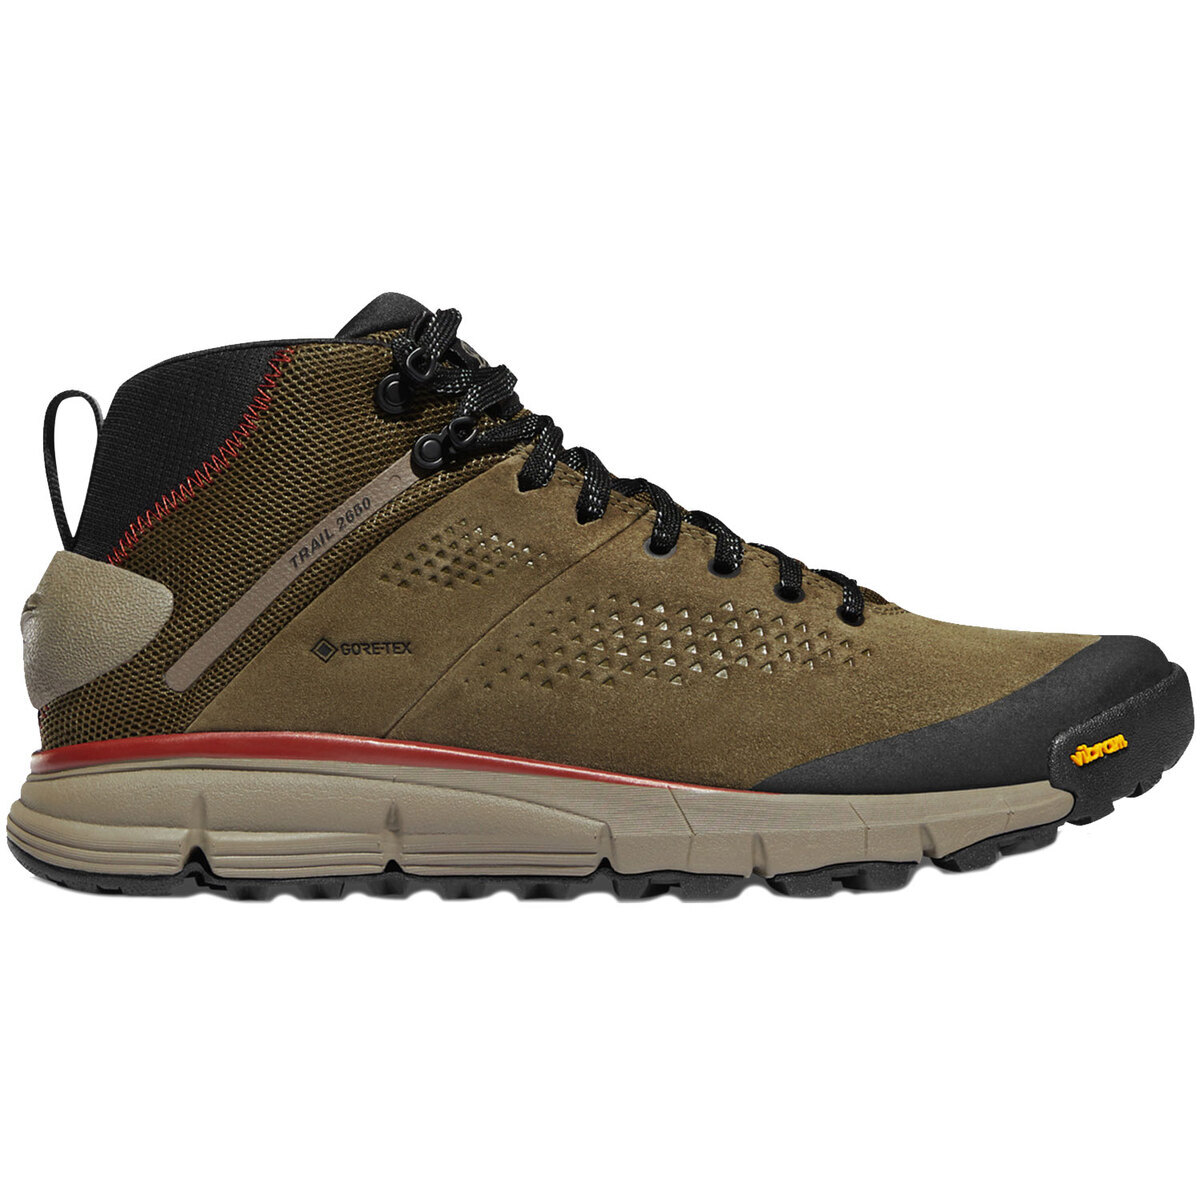 Danner Men's Trail 2650 GORE-TEX Low Top Hiking Boot - Dusty Olive ...